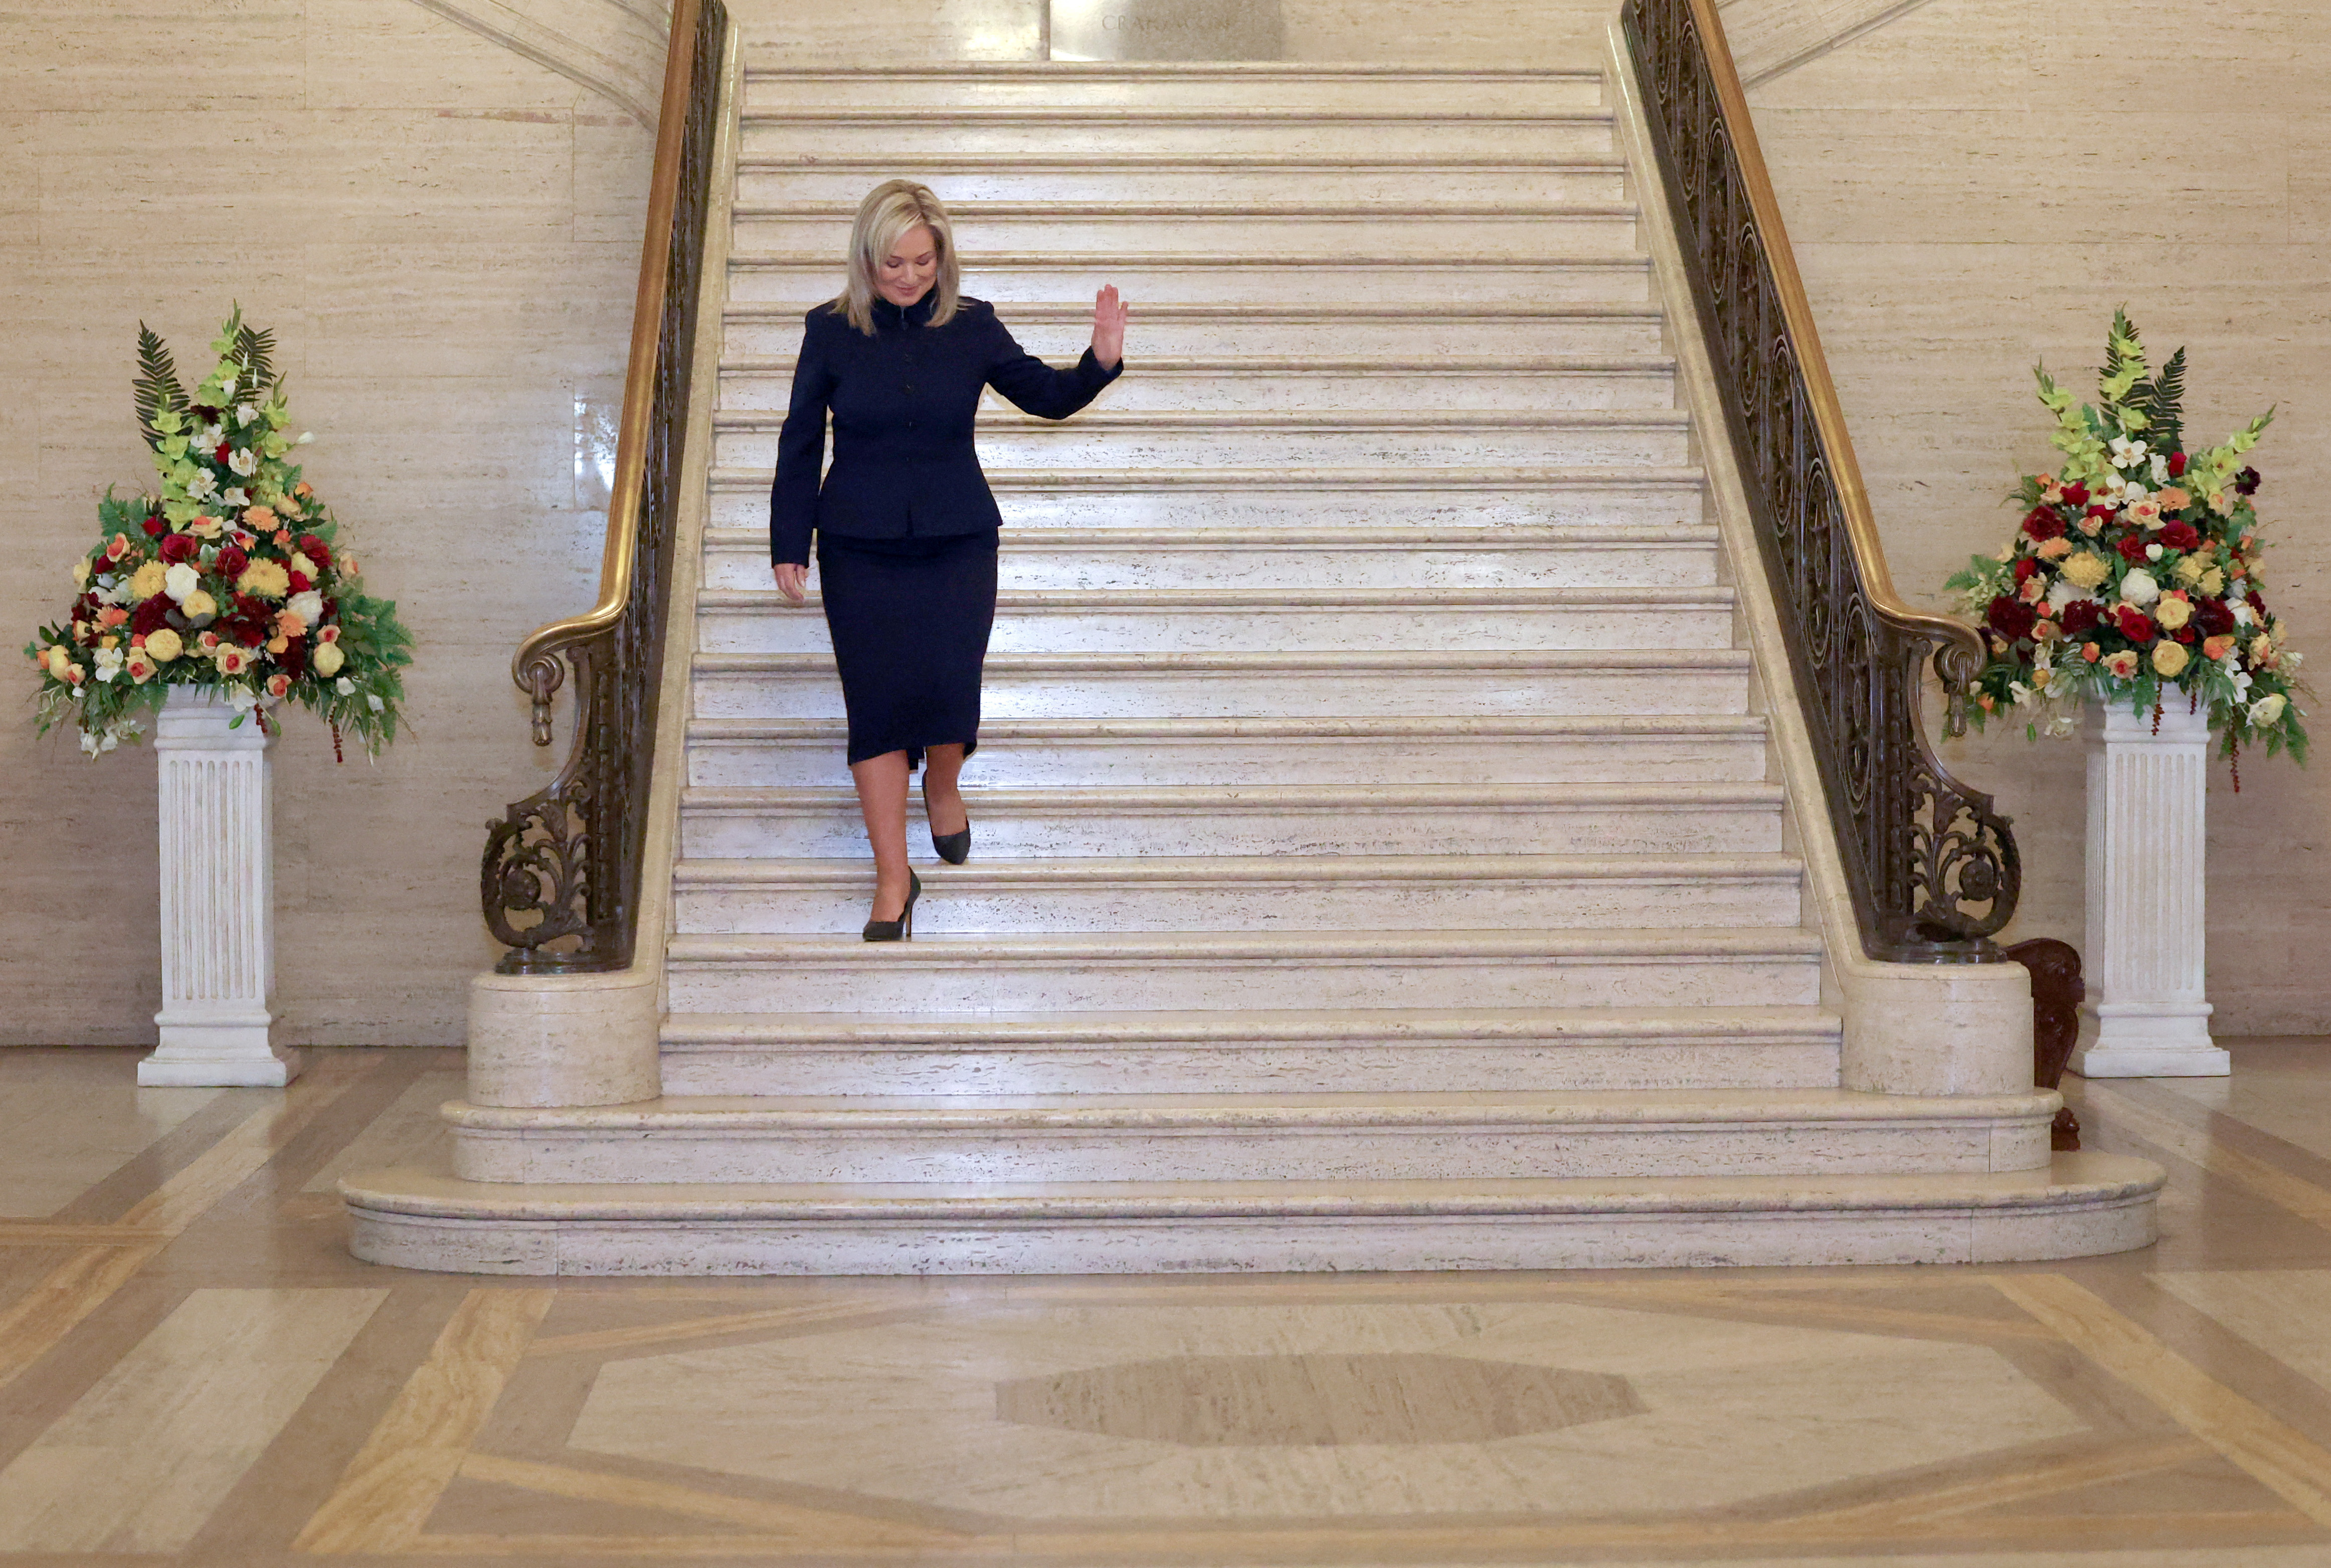 Northern Ireland lawmakers elect the Irish First Minister, in Belfast